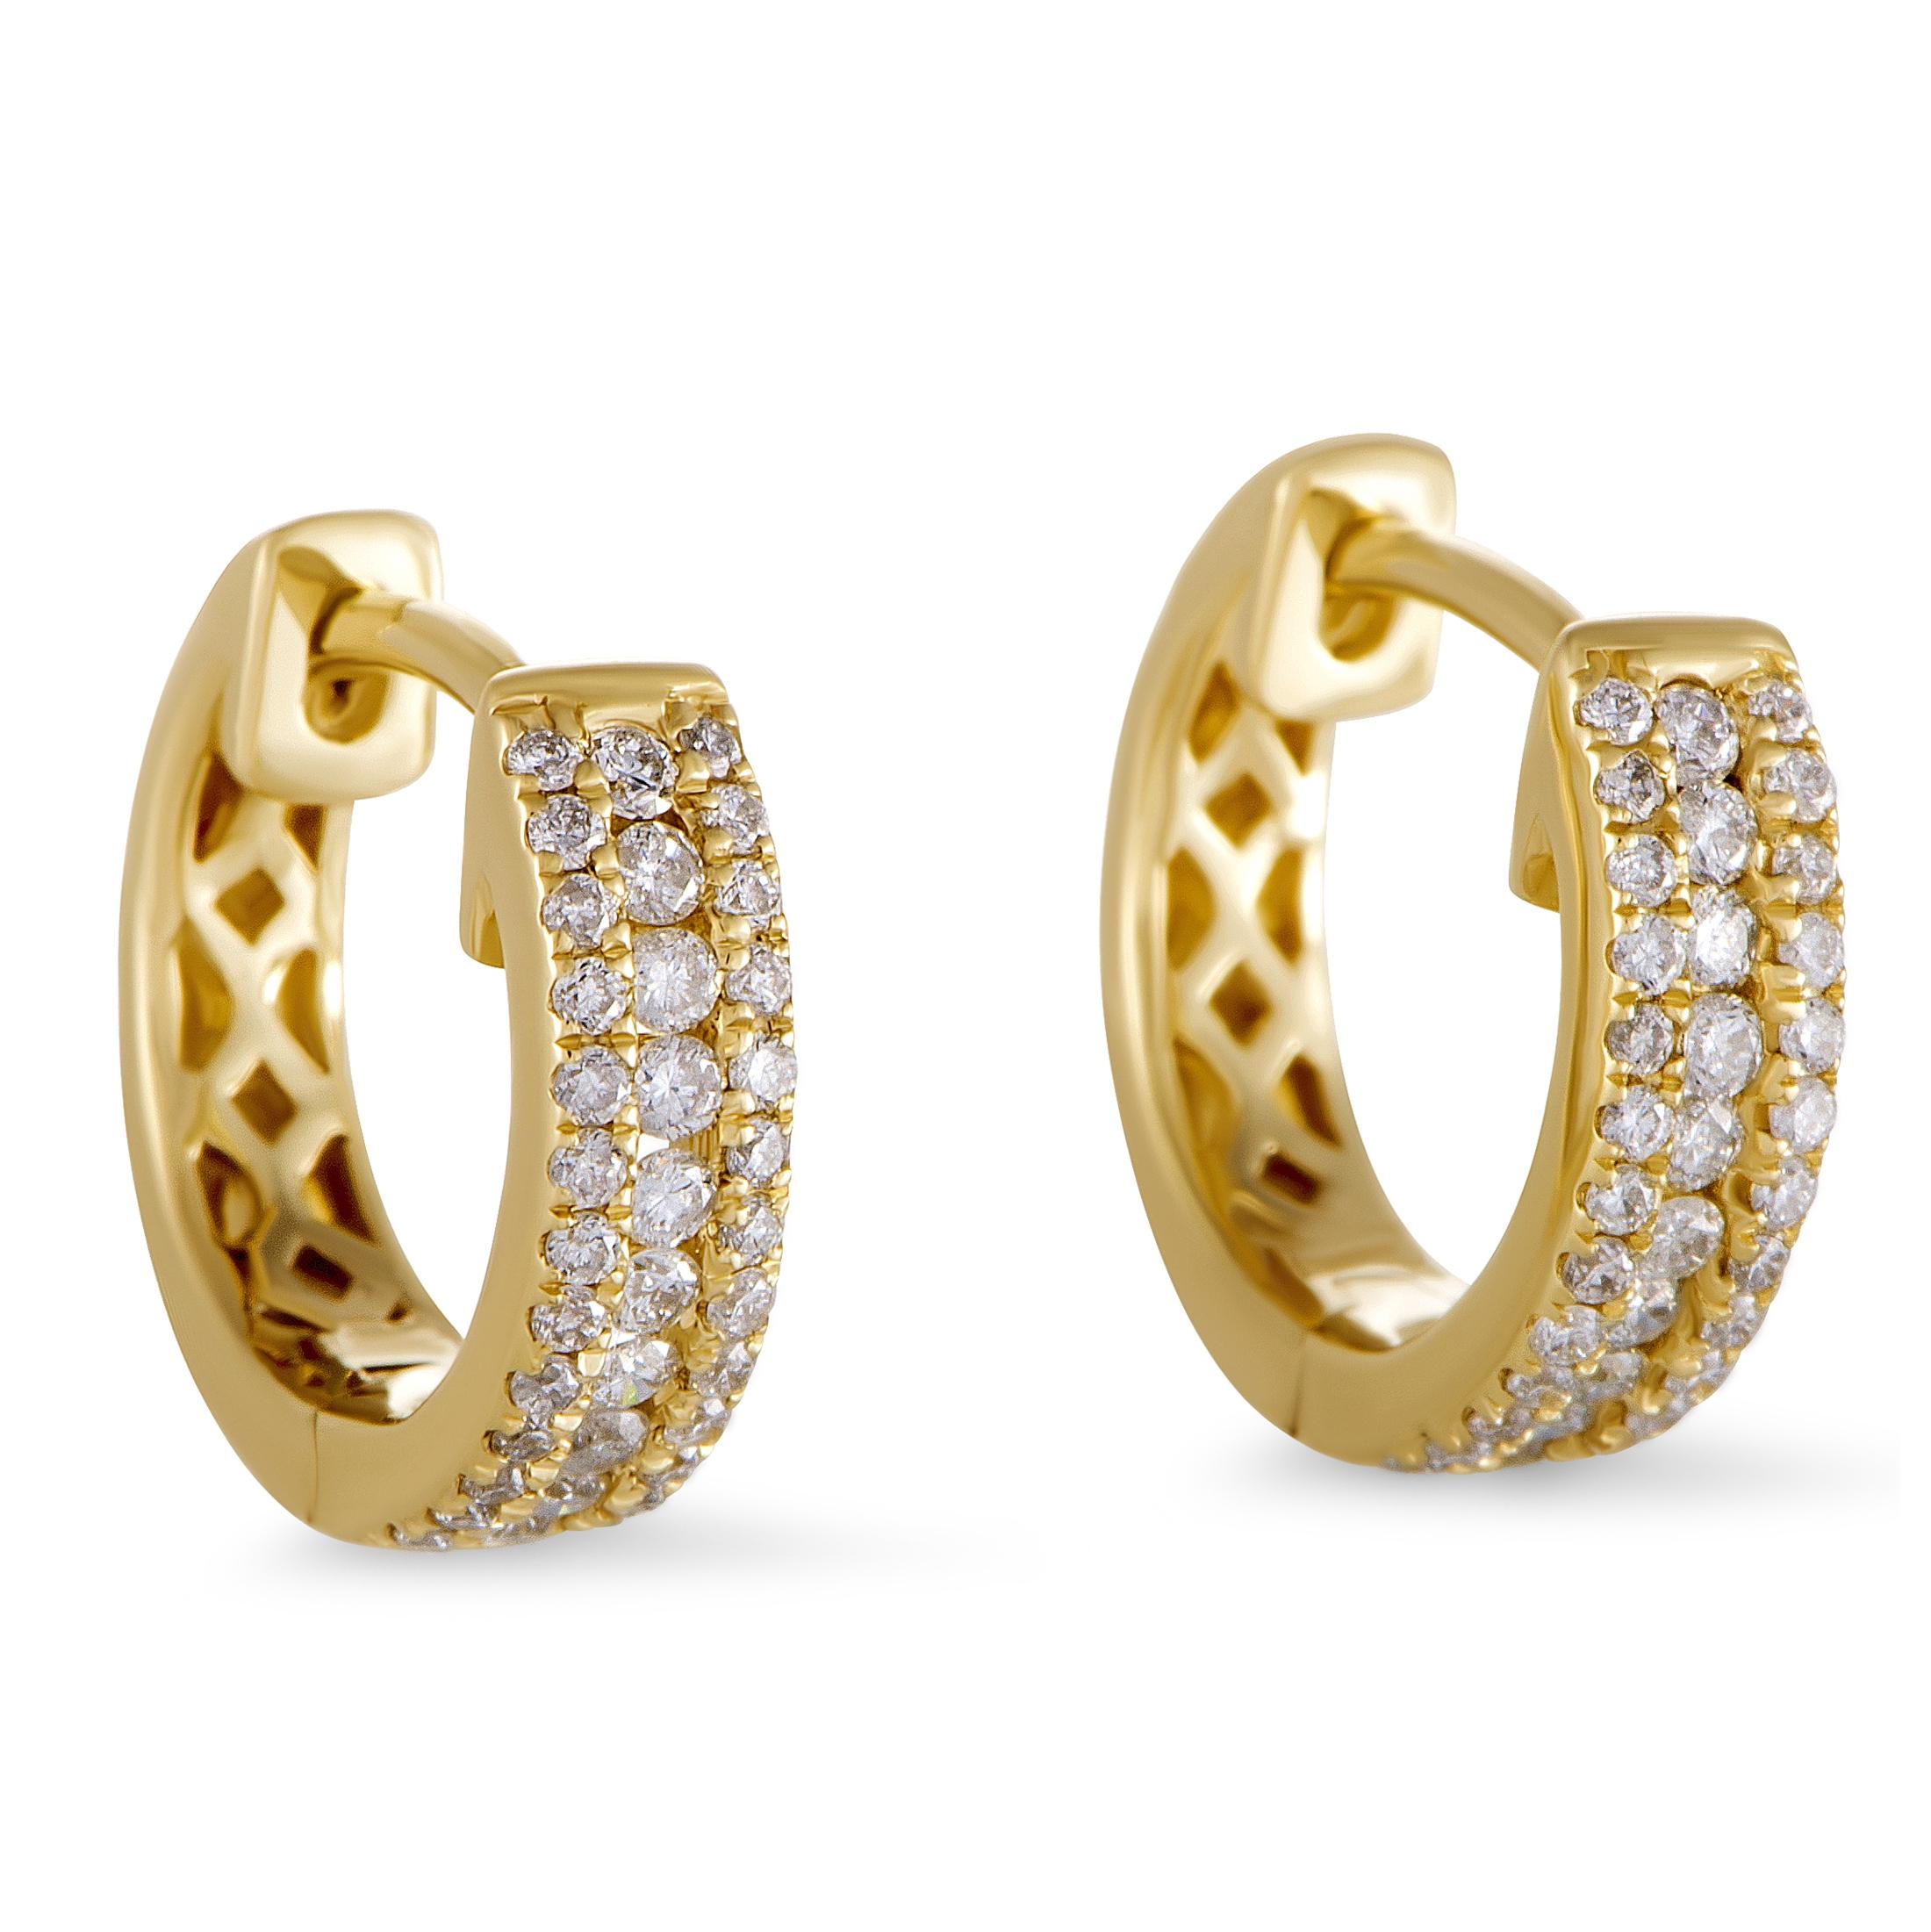 Accentuate your ensembles in a splendidly classy fashion with these wonderful earrings that feature an exceptionally elegant design topped off with an incredibly luxurious gemstone décor. The pair is masterfully crafted from attractive 14K yellow